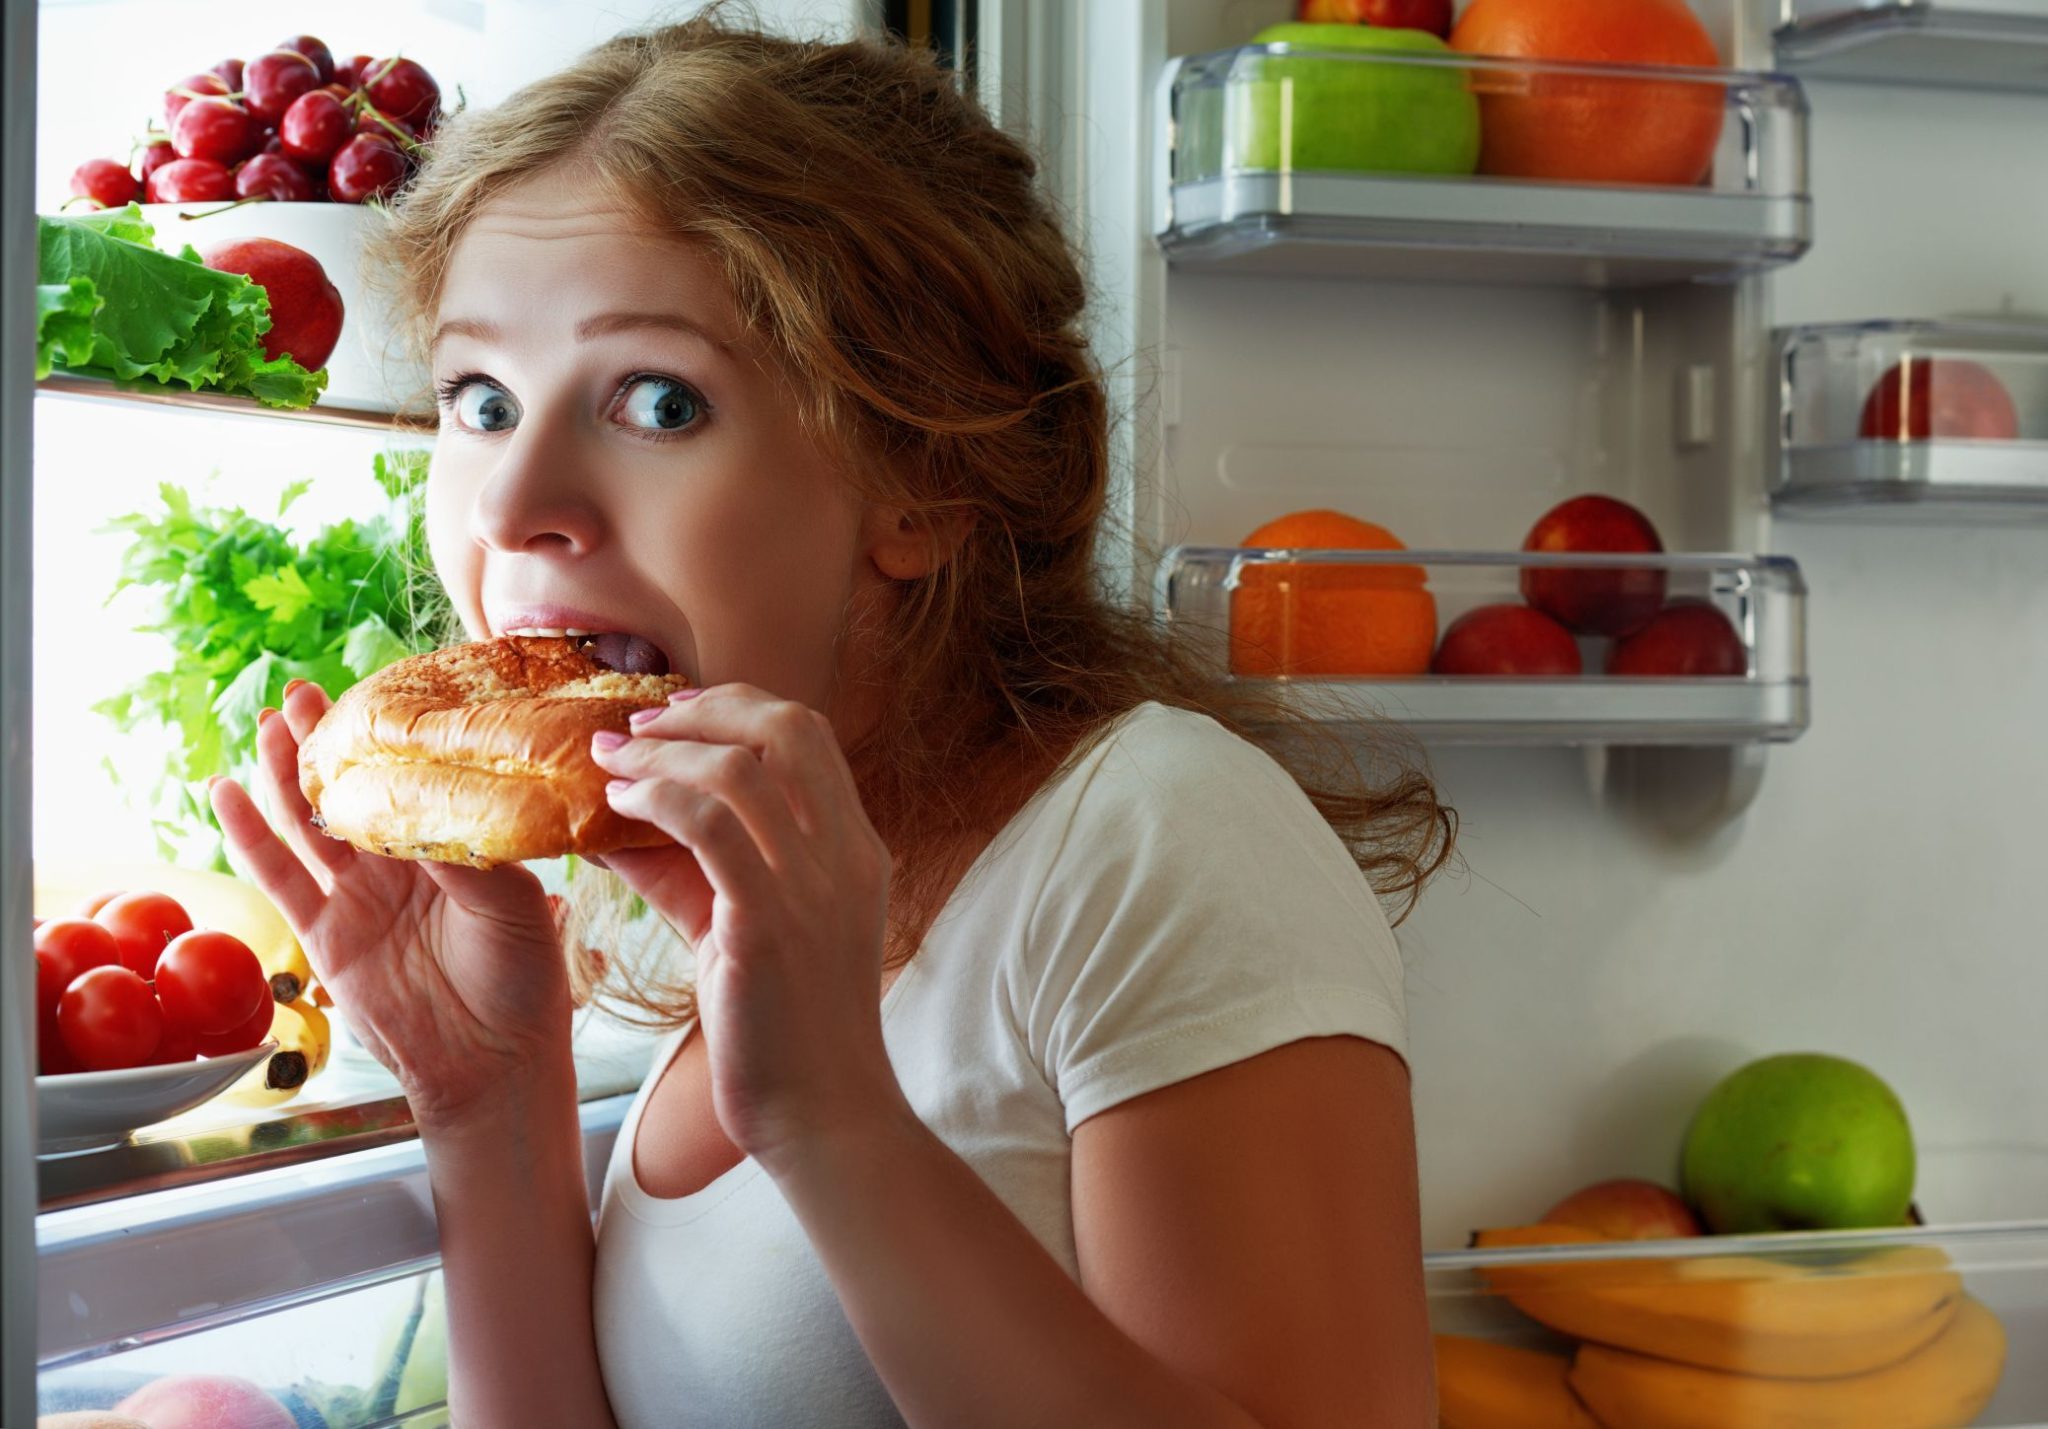 A girl sneaks to her refrigerator at mid-night to eat snacks which subsequently results to insomnia.